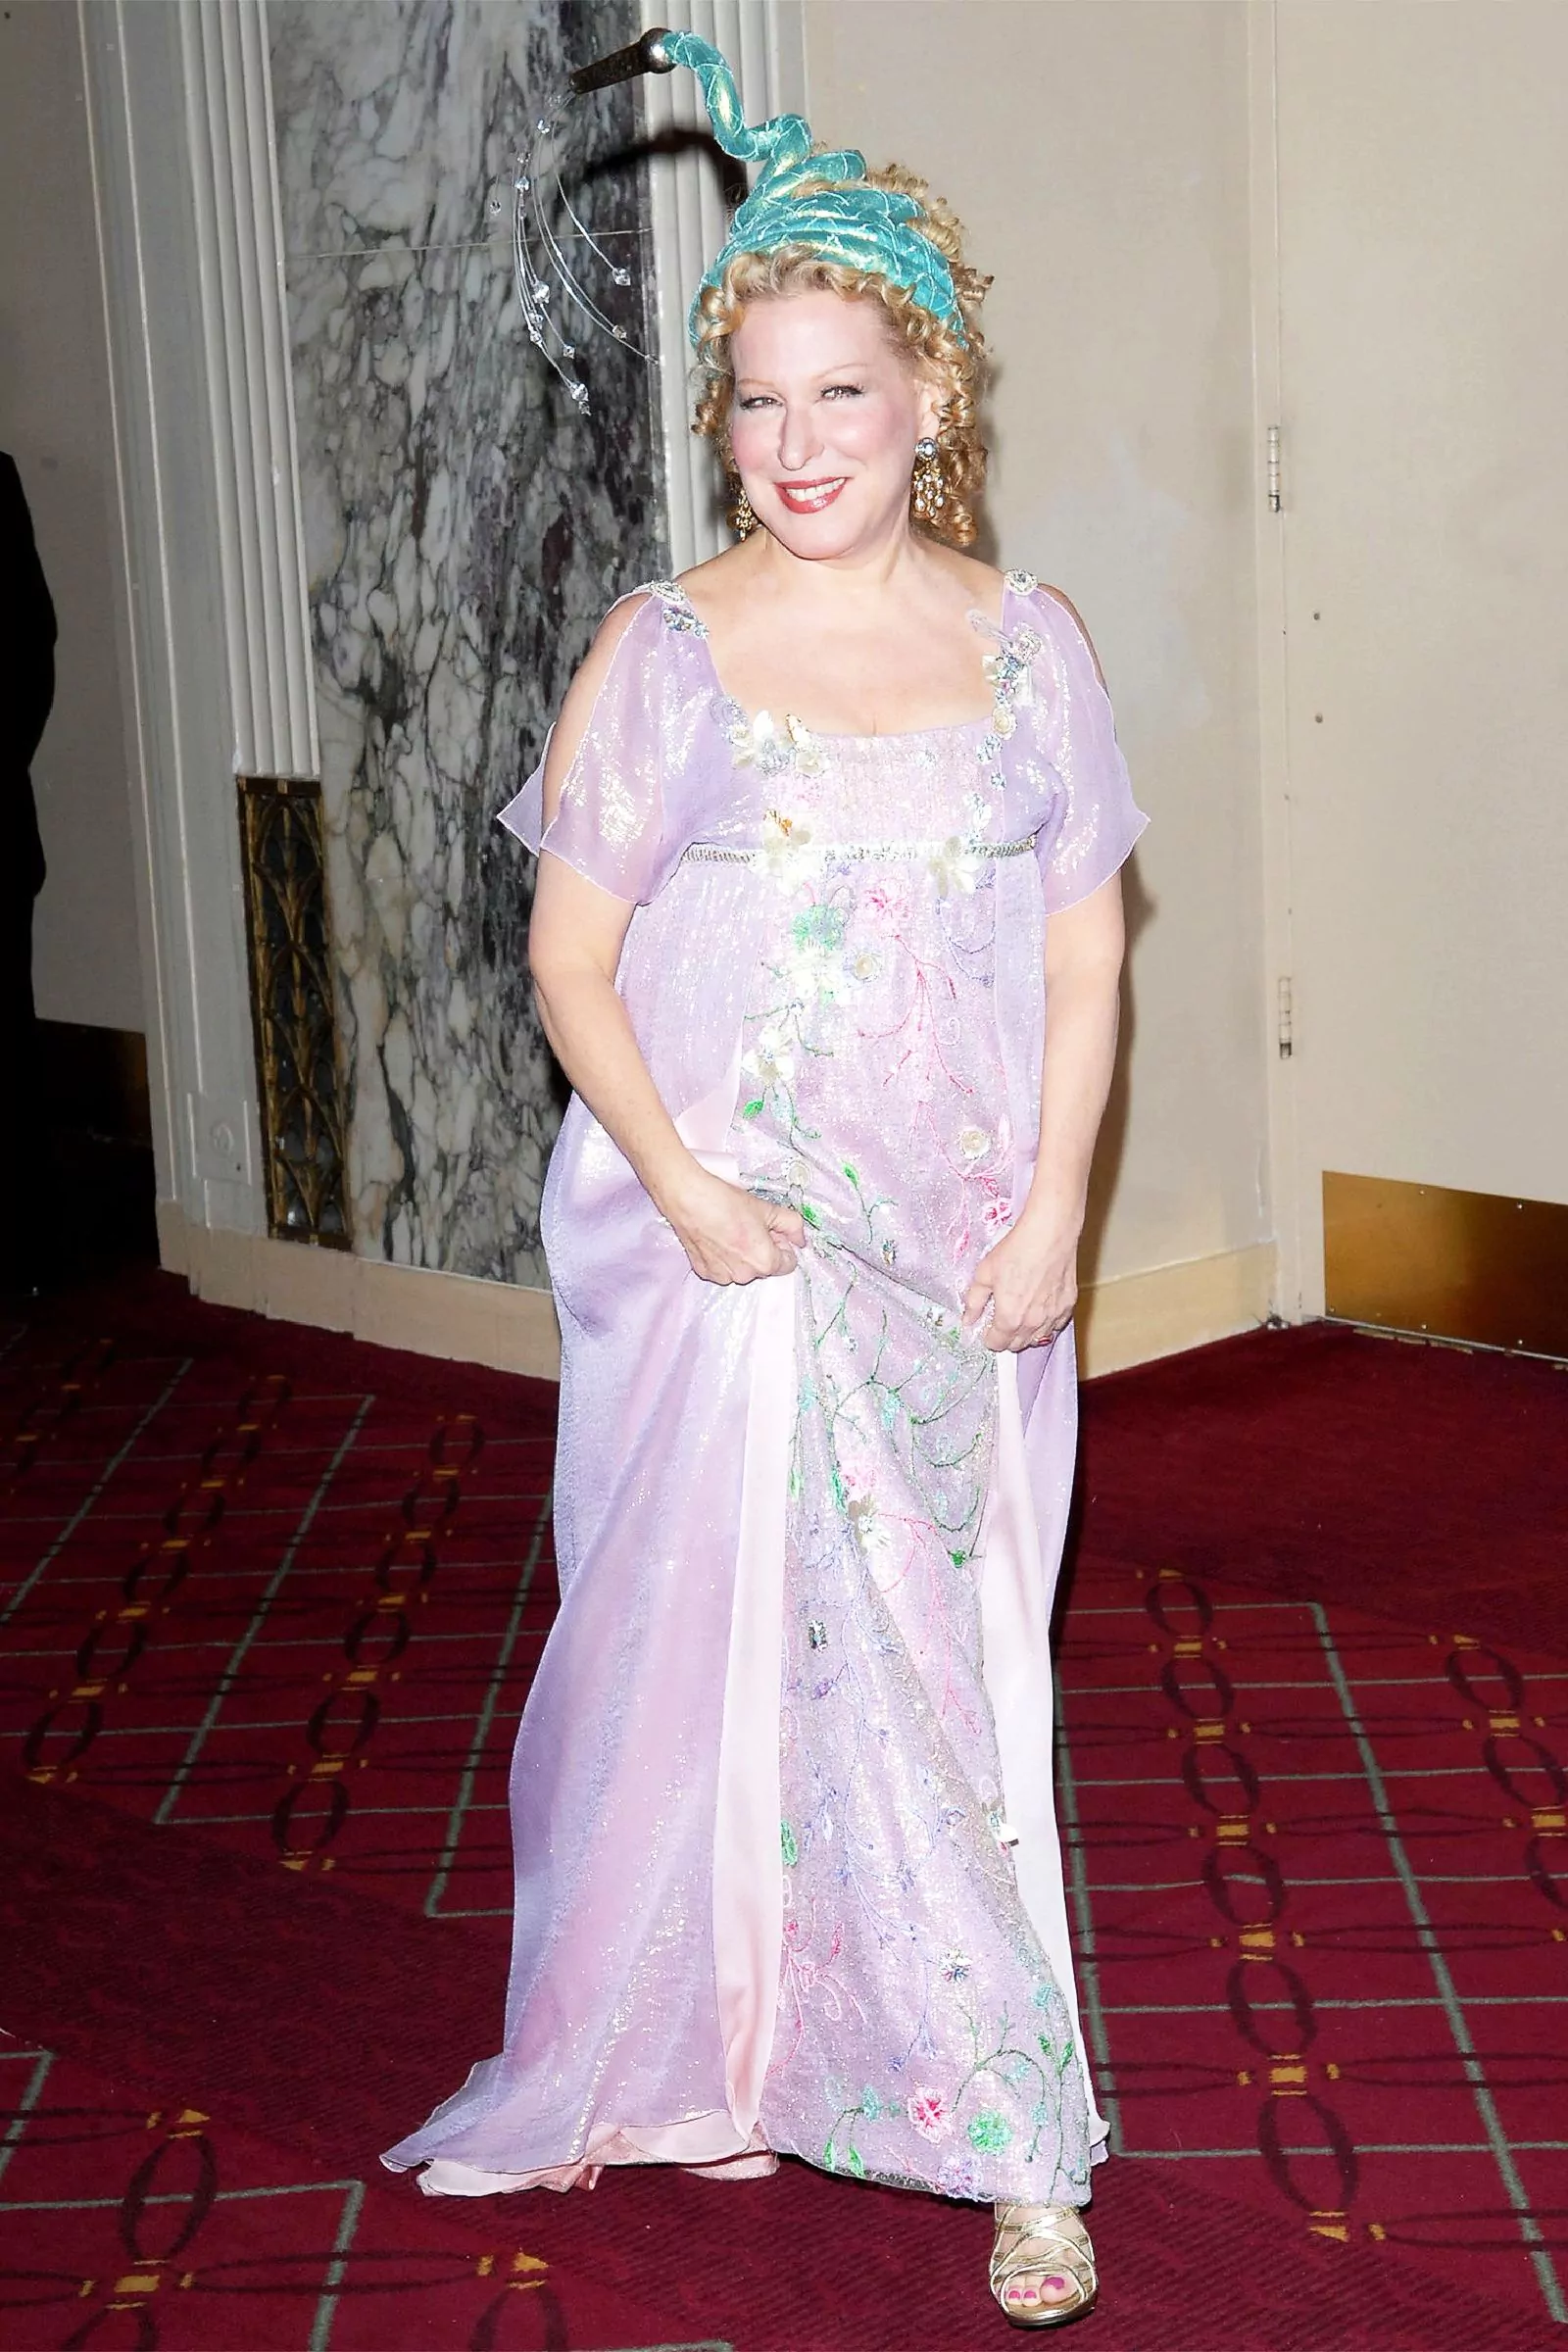 Bette Midler at the Halloween Ball in New York, October 31, 2006